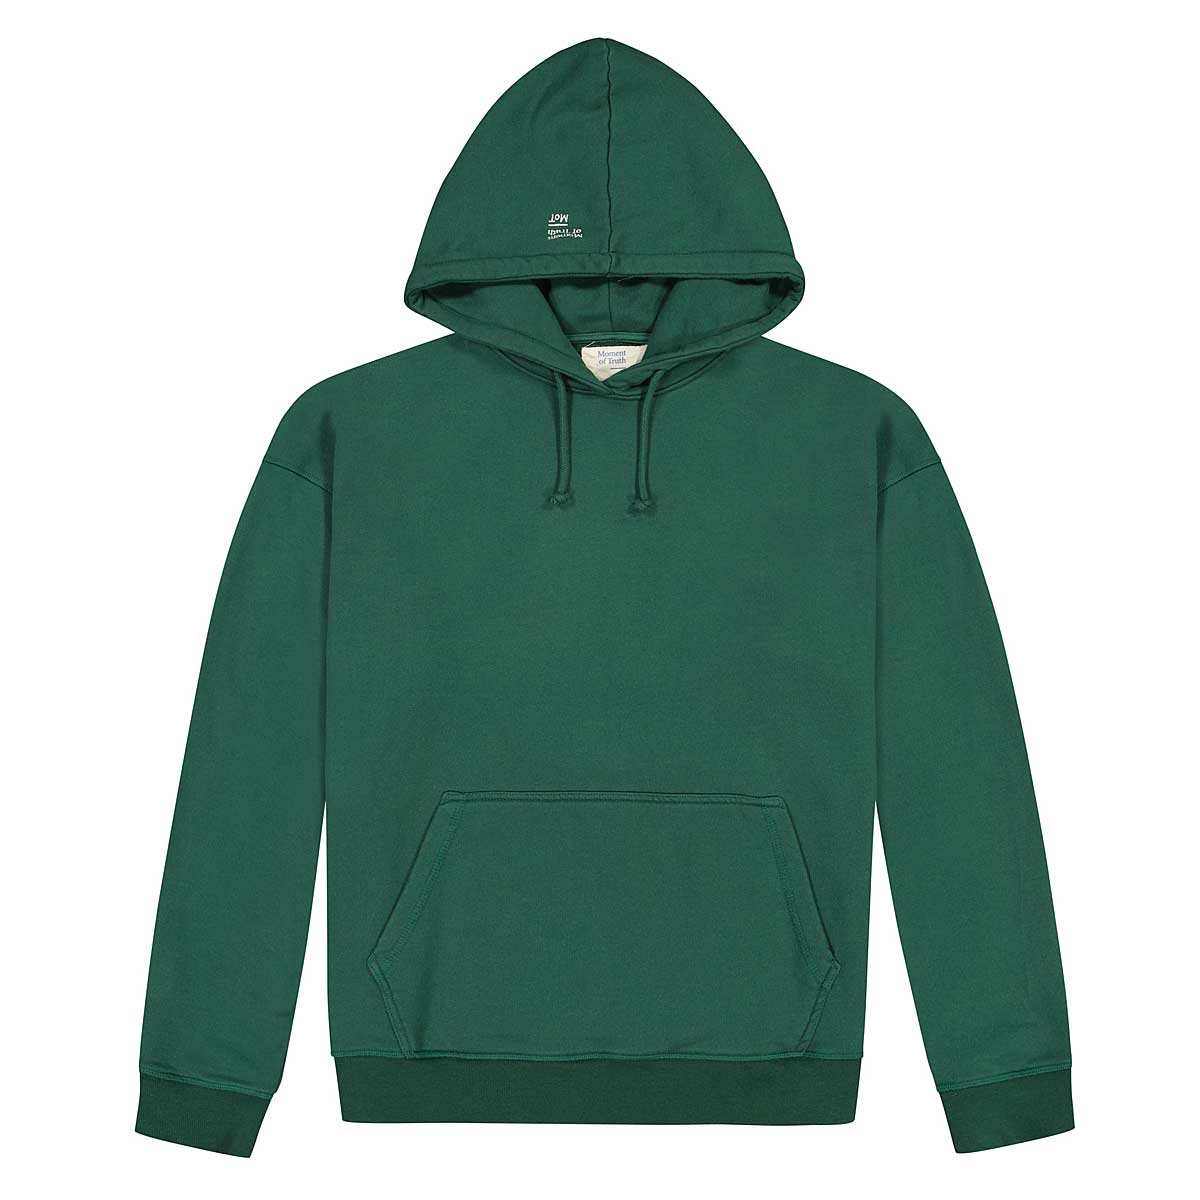 Moment Of Truth Lux Hoody, Hunter Green